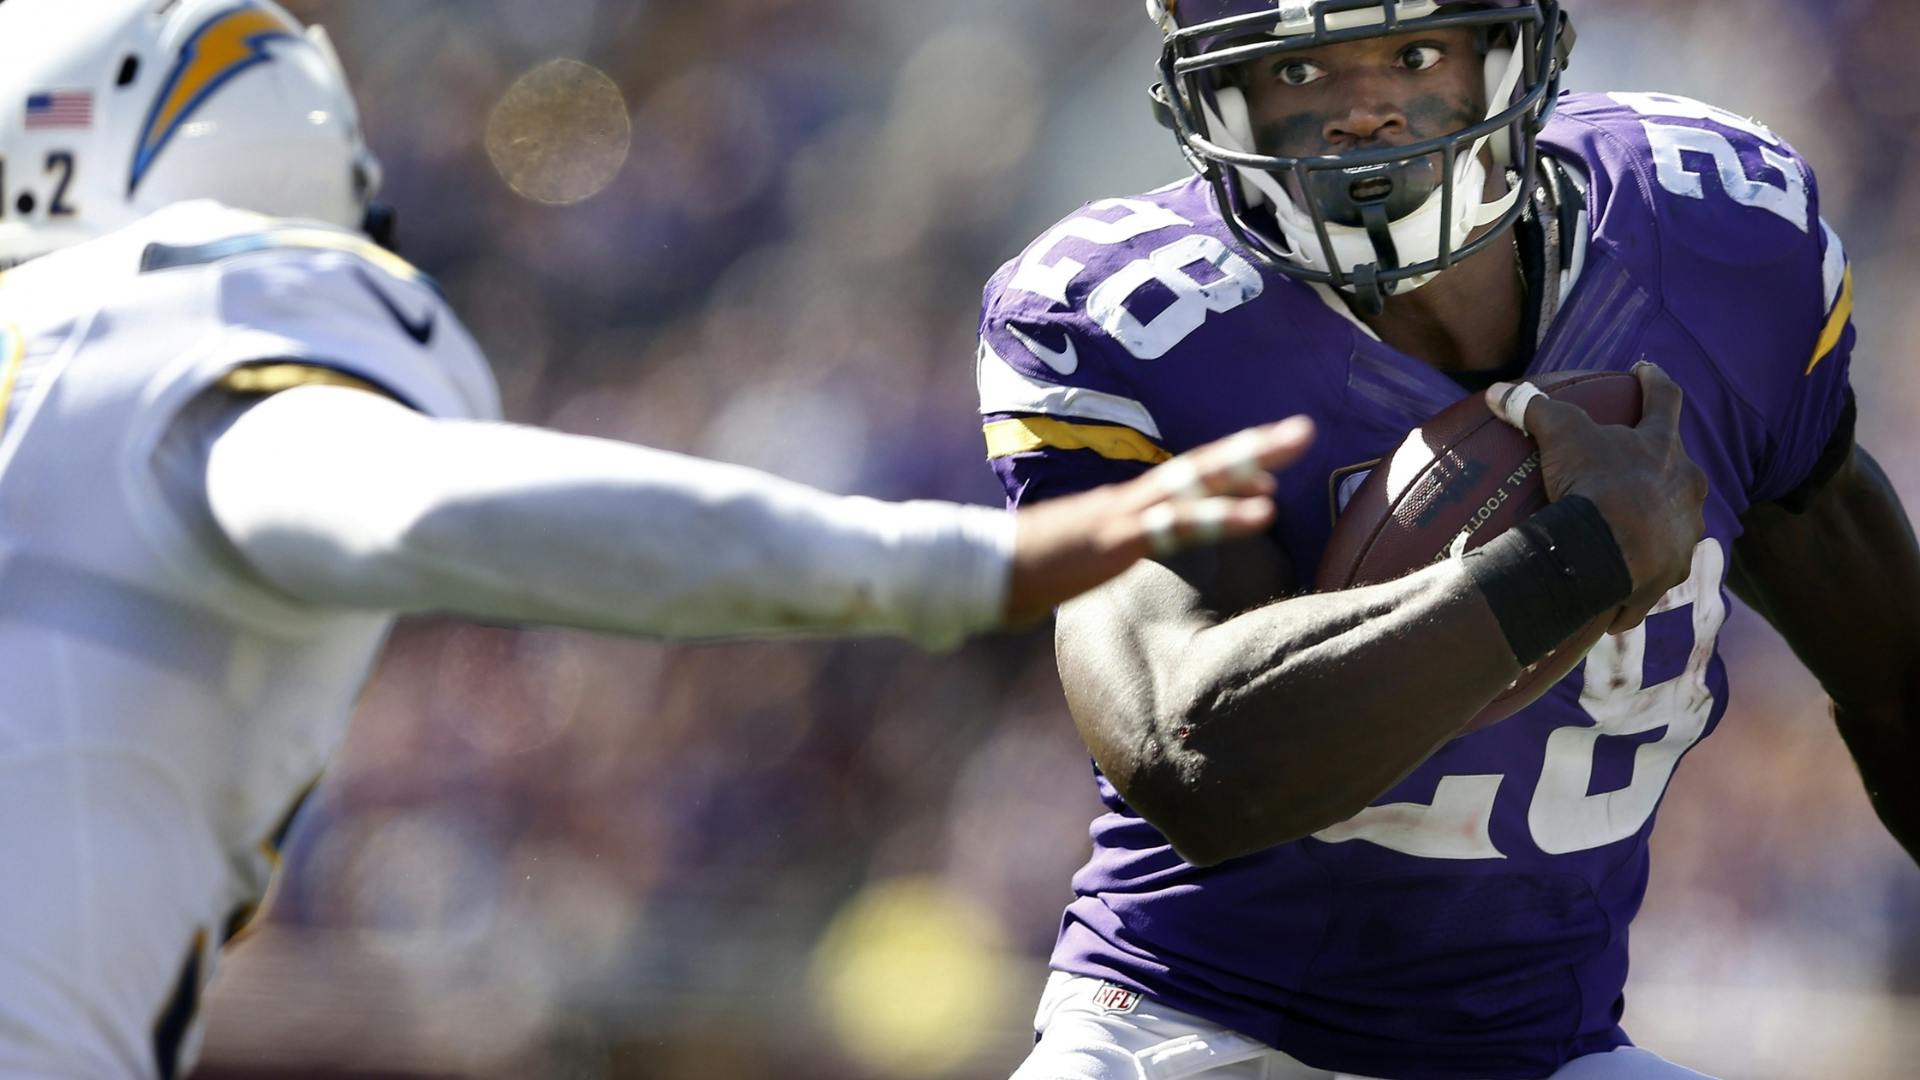 Vikings star running back Adrian Peterson rushed for two touchdowns just hours after his son was born and helped lead his team to a 31-14 victory.